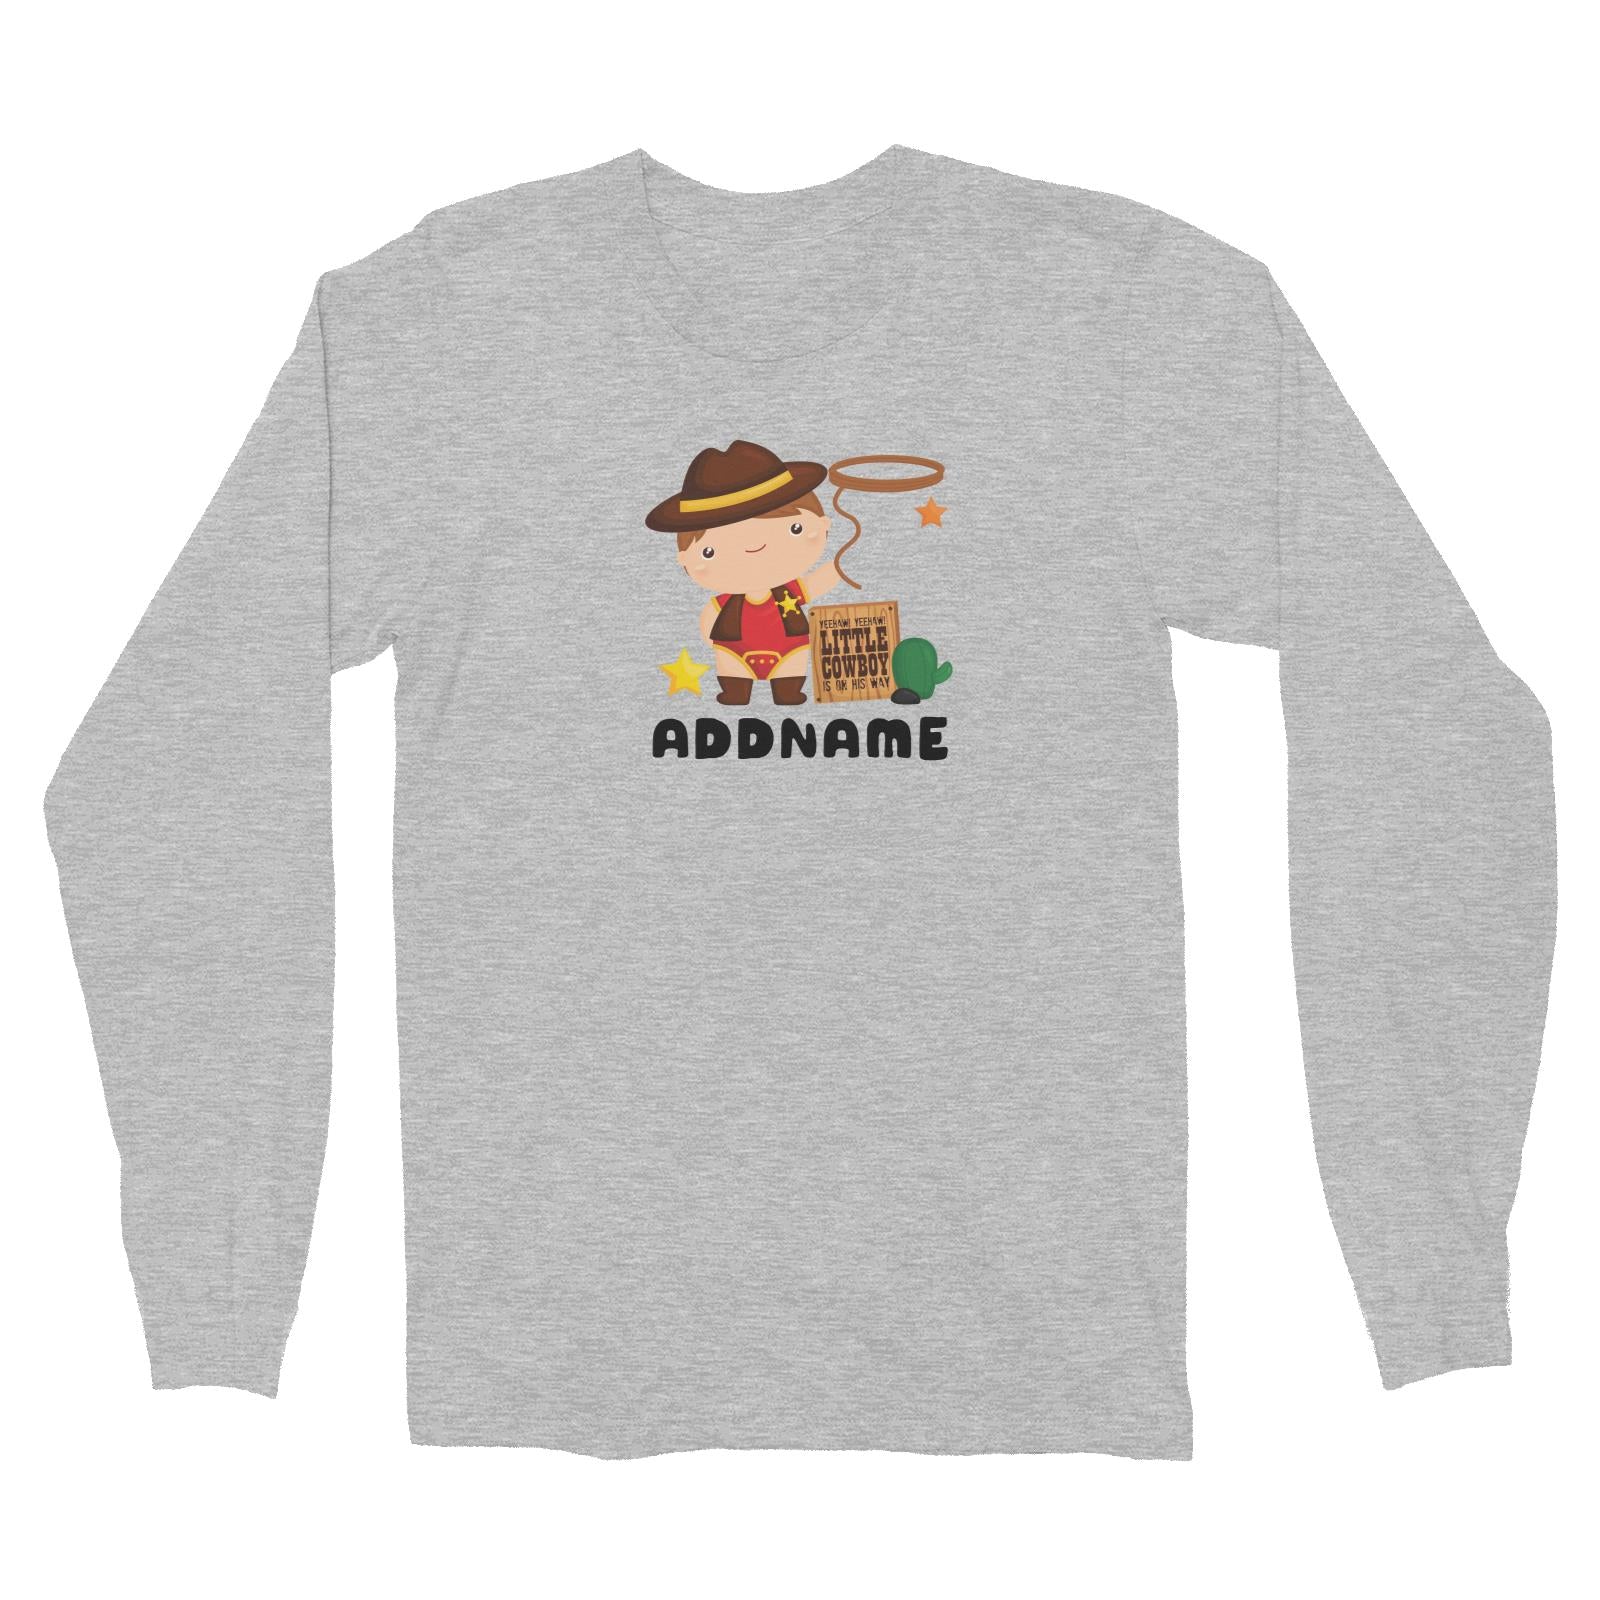 Birthday Cowboy Style Yeehaw Little Cowboy Is On His Way Addname Long Sleeve Unisex T-Shirt